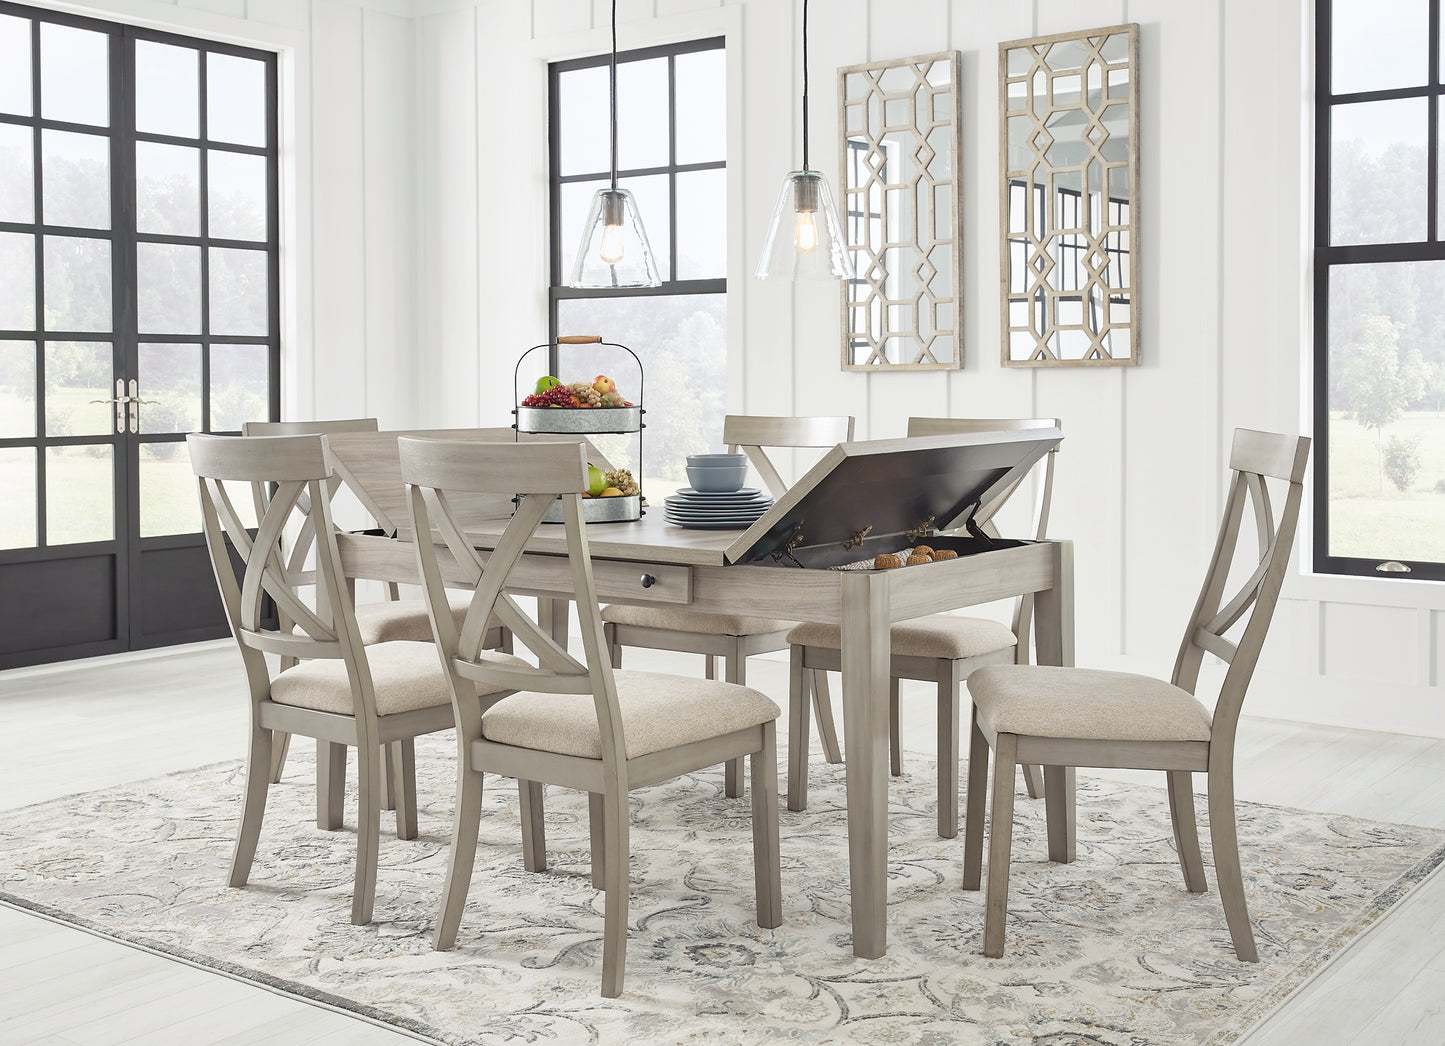 Parellen Dining Table and 6 Chairs Wilson Furniture (OH)  in Bridgeport, Ohio. Serving Bridgeport, Yorkville, Bellaire, & Avondale